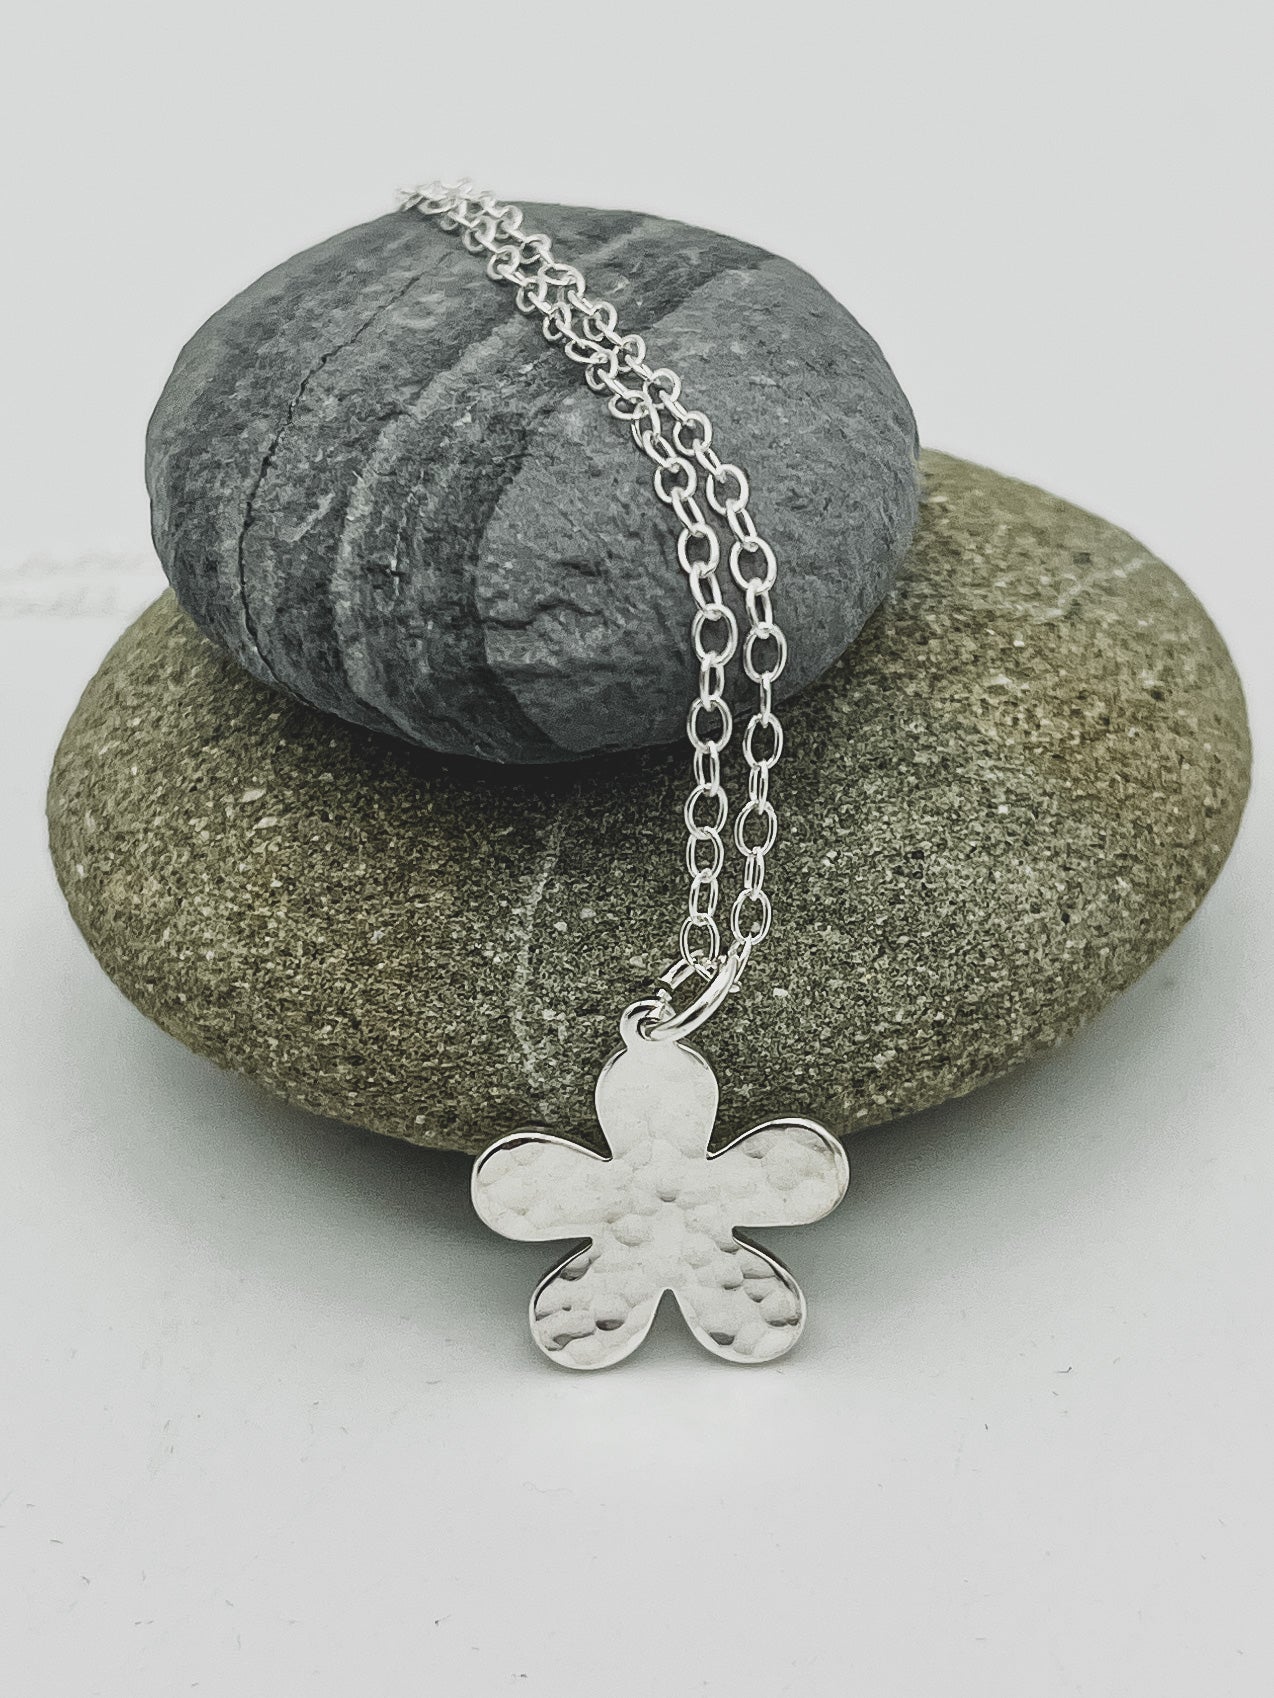 Single flower pendant 15mm wide hammered finish on 16mm trace chain